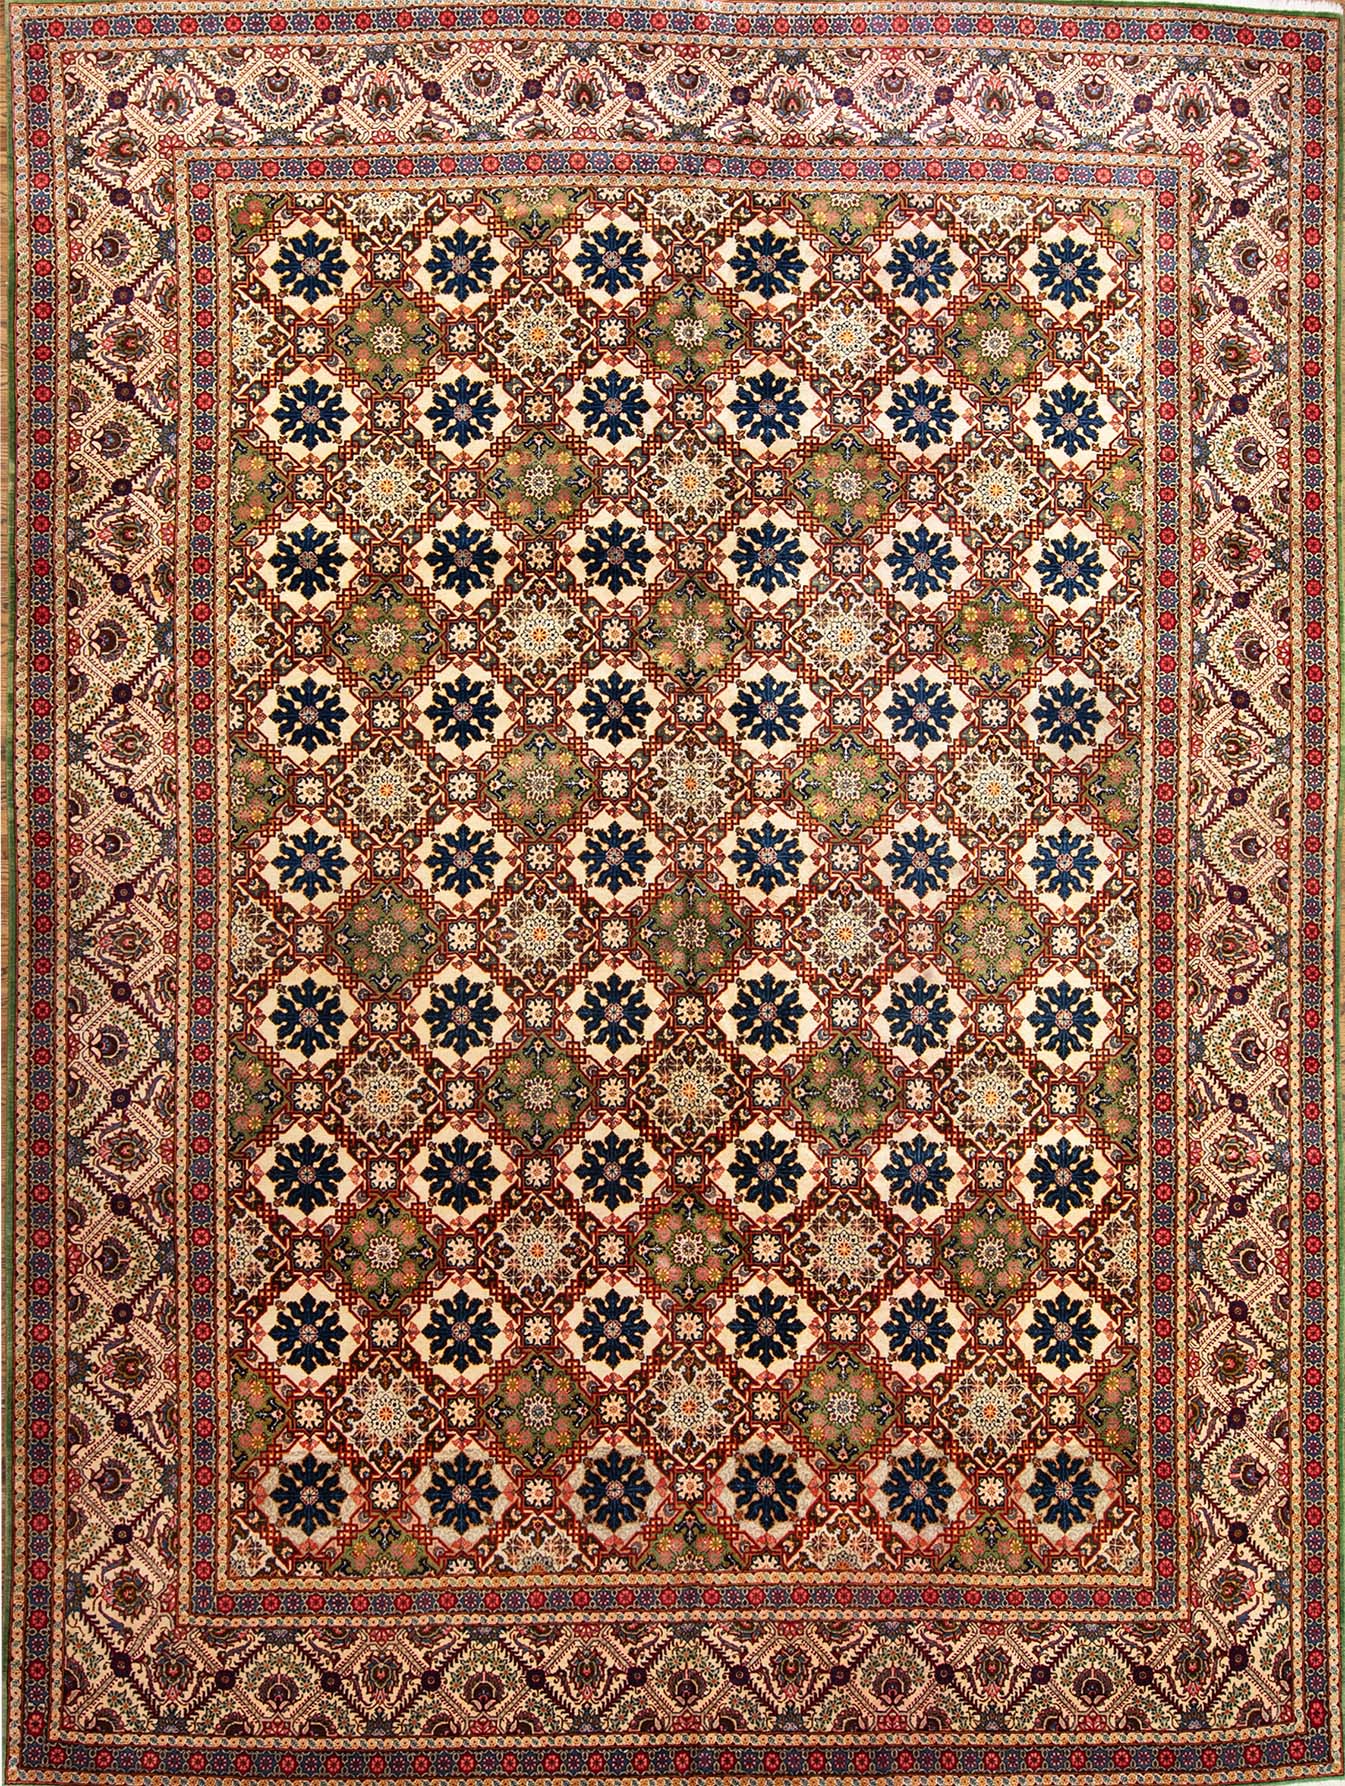 Large area rugs. Hand knotted Persian Kashan area rug made of wool multicolor with green and beige. Size 11x14.